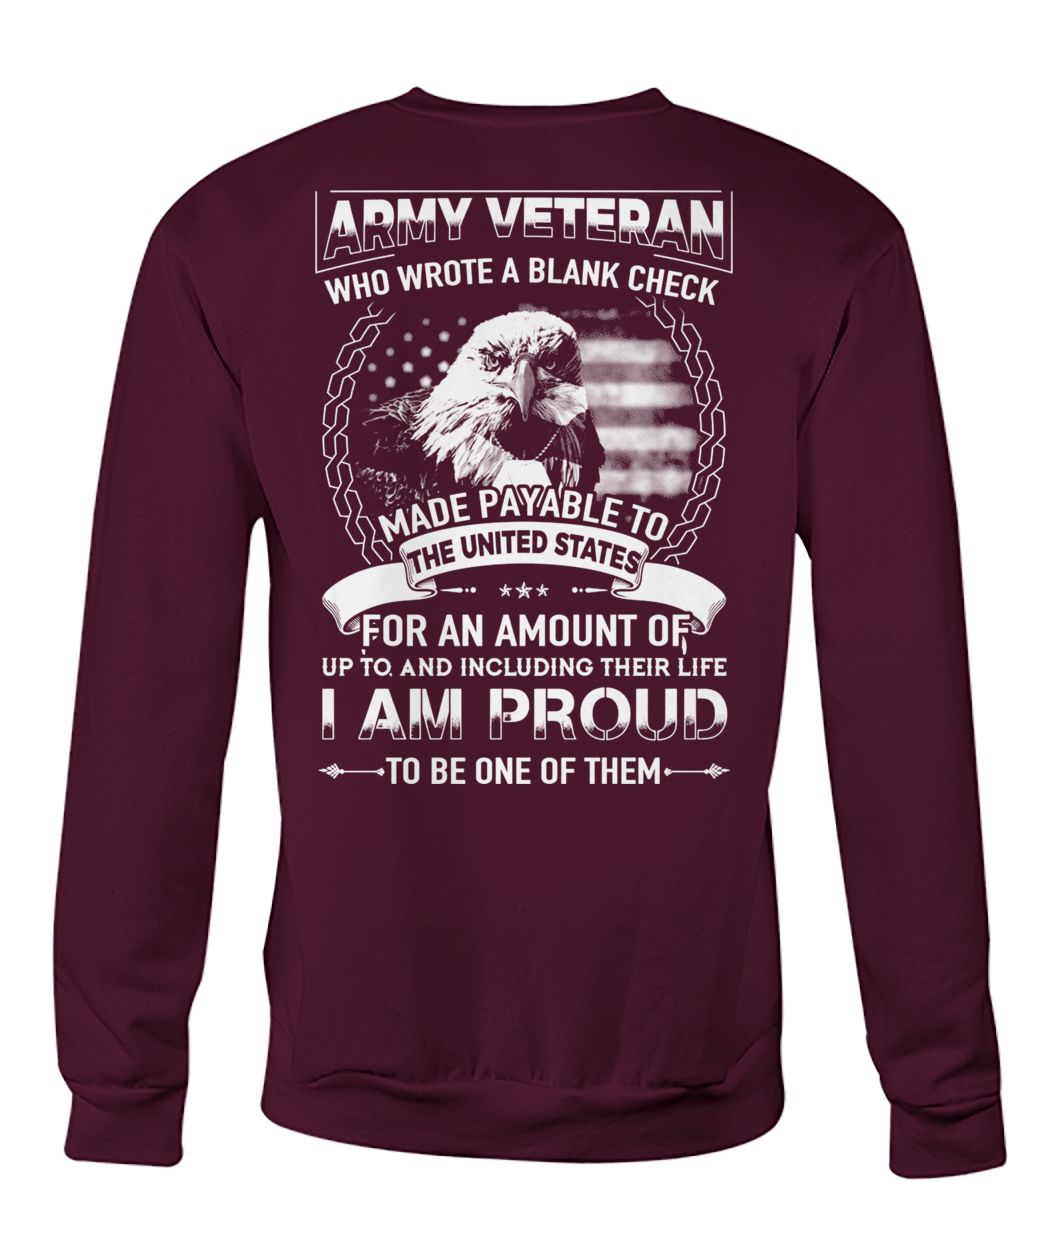 Army veteran who wrote a blank check made payable to the united states crew neck sweatshirt